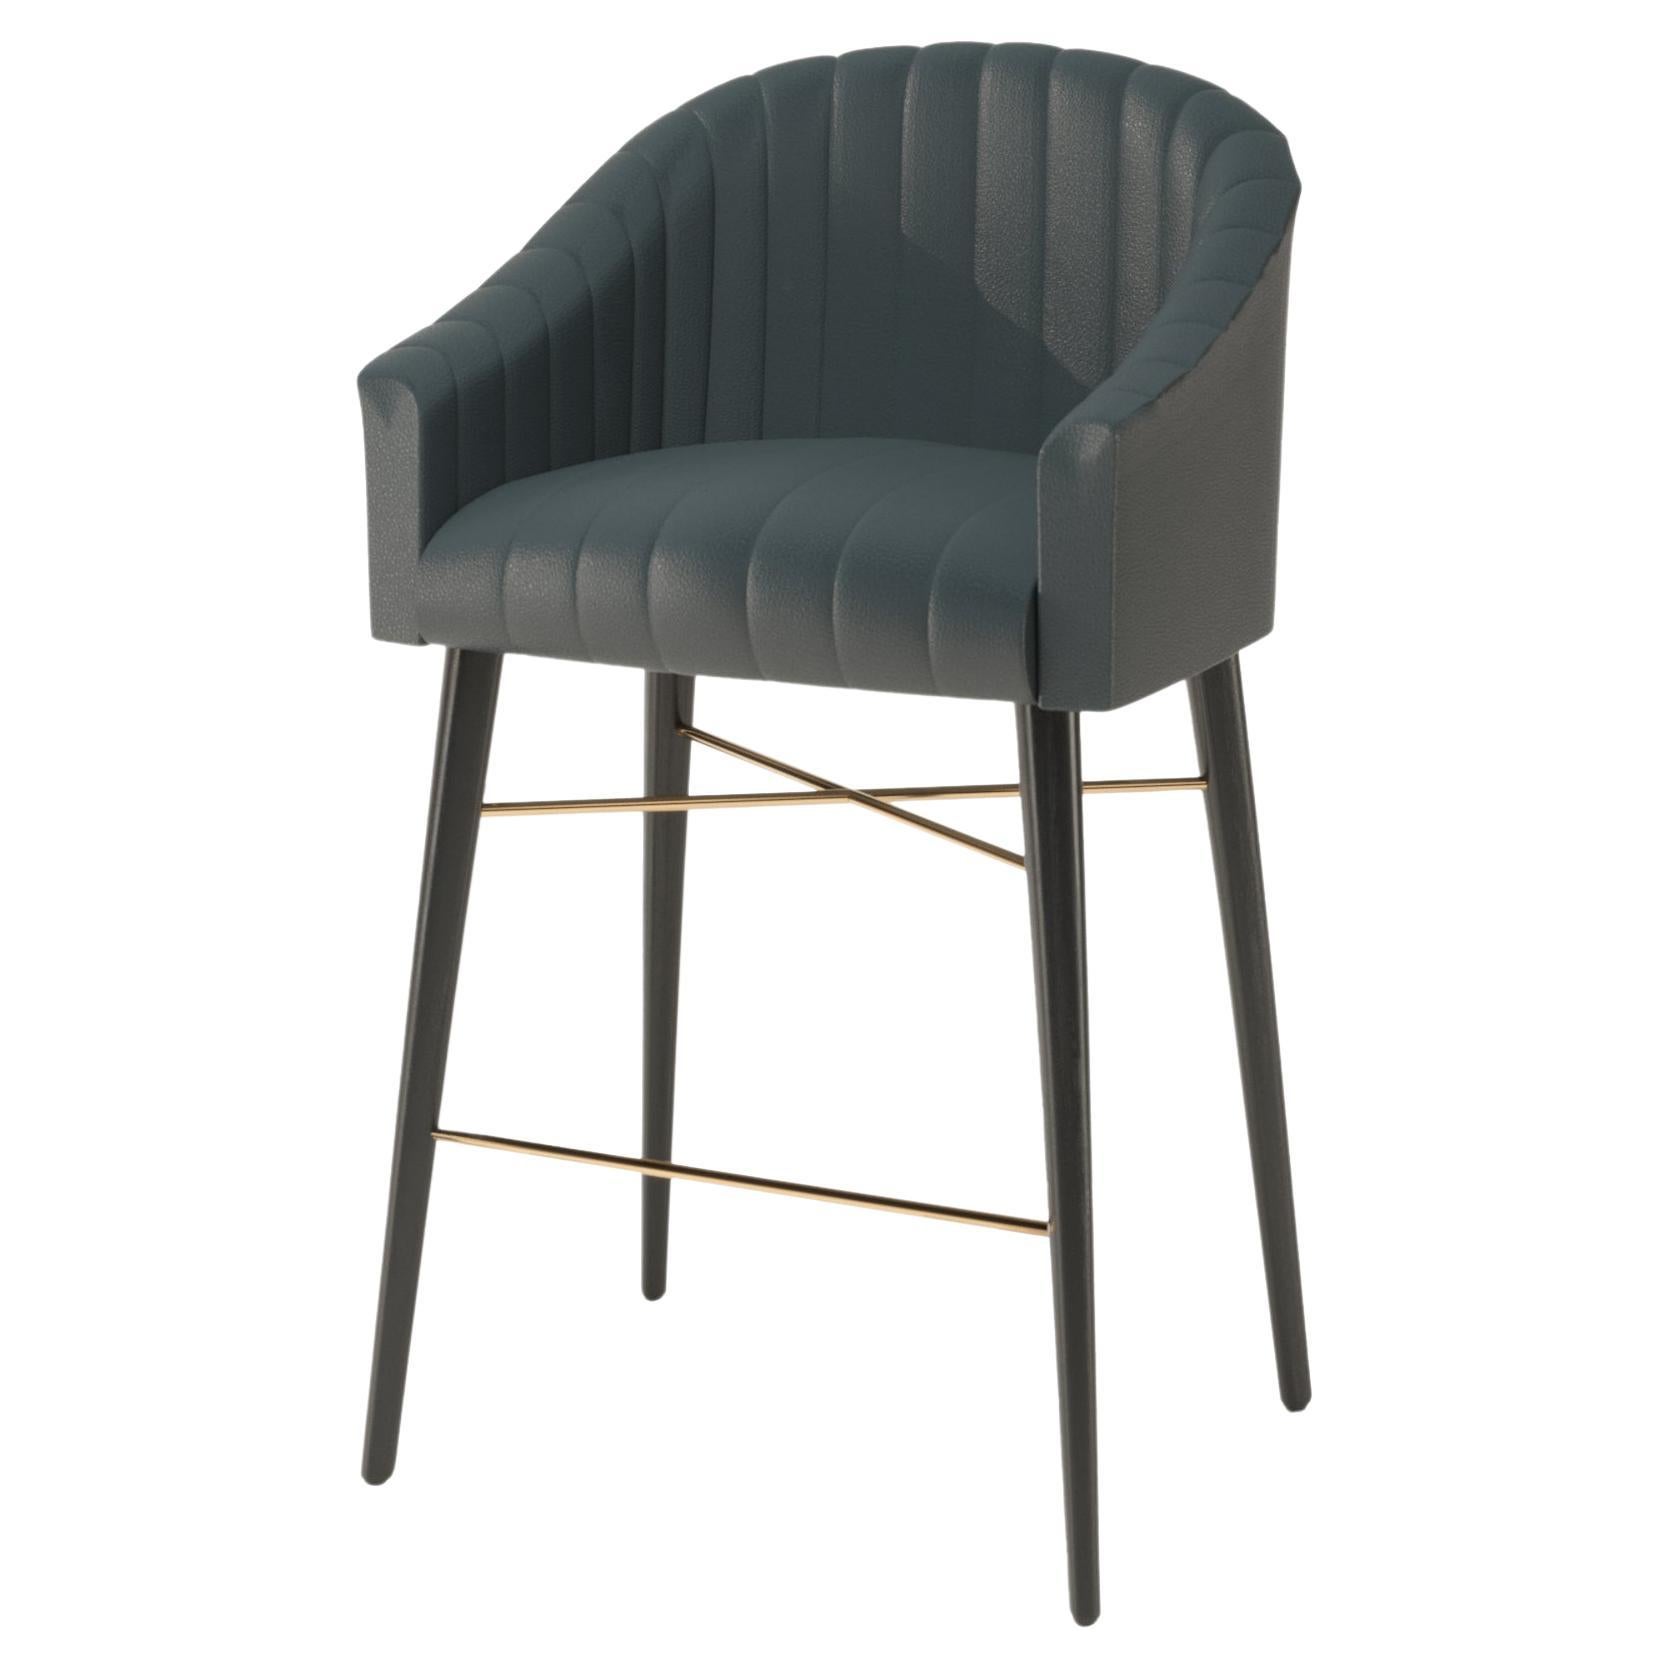 Petroil Leather Modern Uphostery Bar Stool For Sale